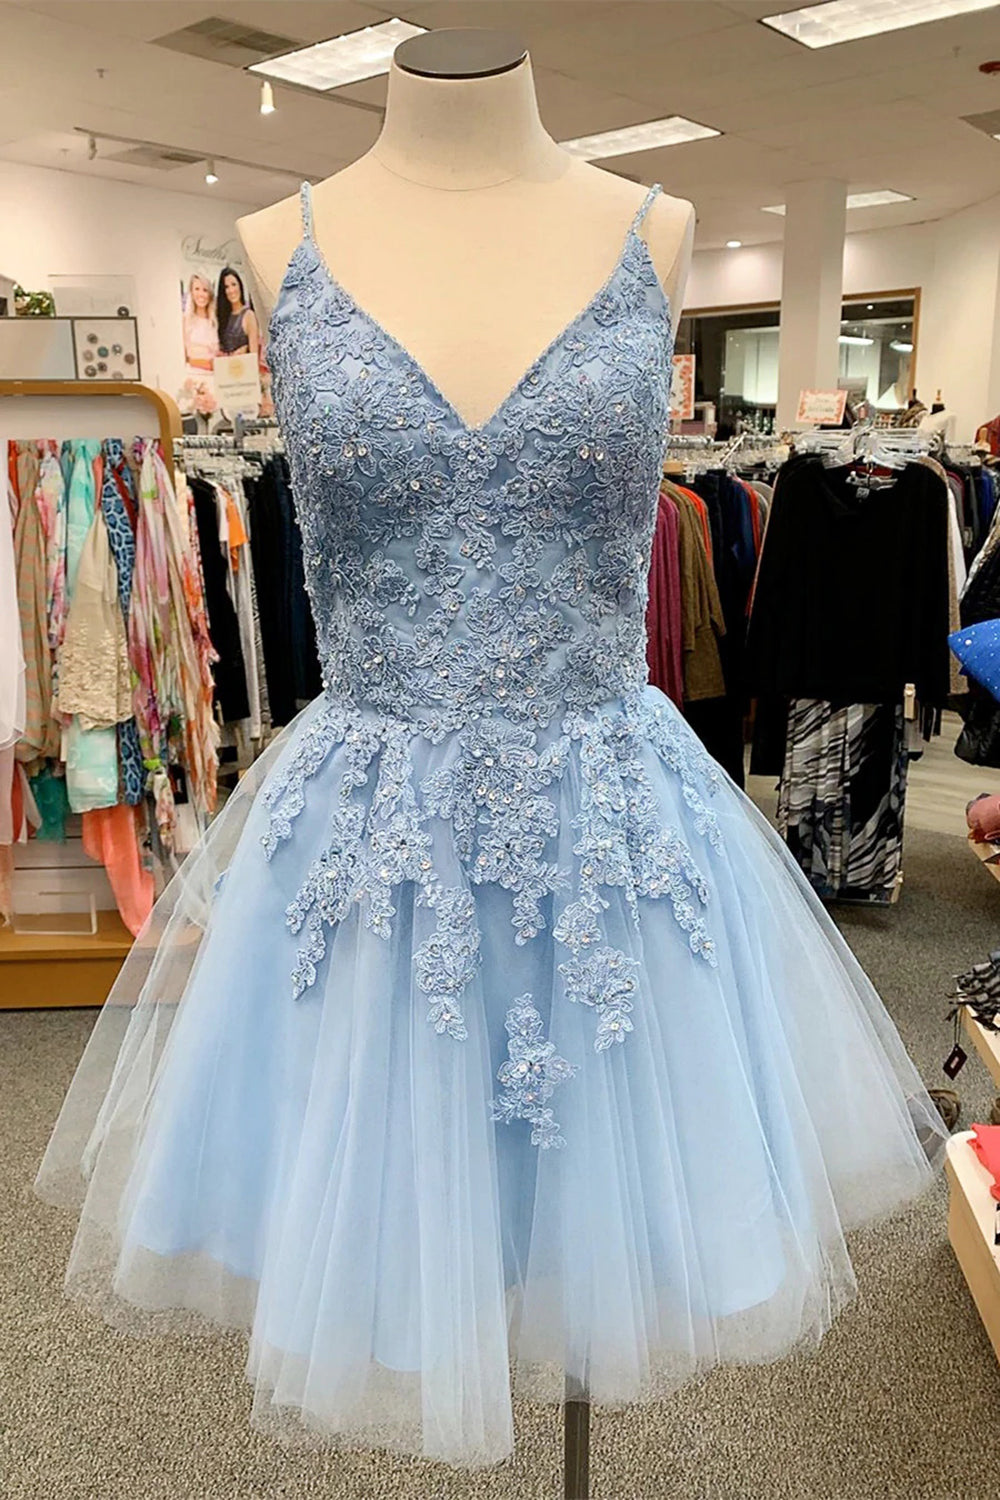 Blue Spaghetti Straps Corset Homecoming Dress With Appliques Gowns, Evening Dress Knee Length